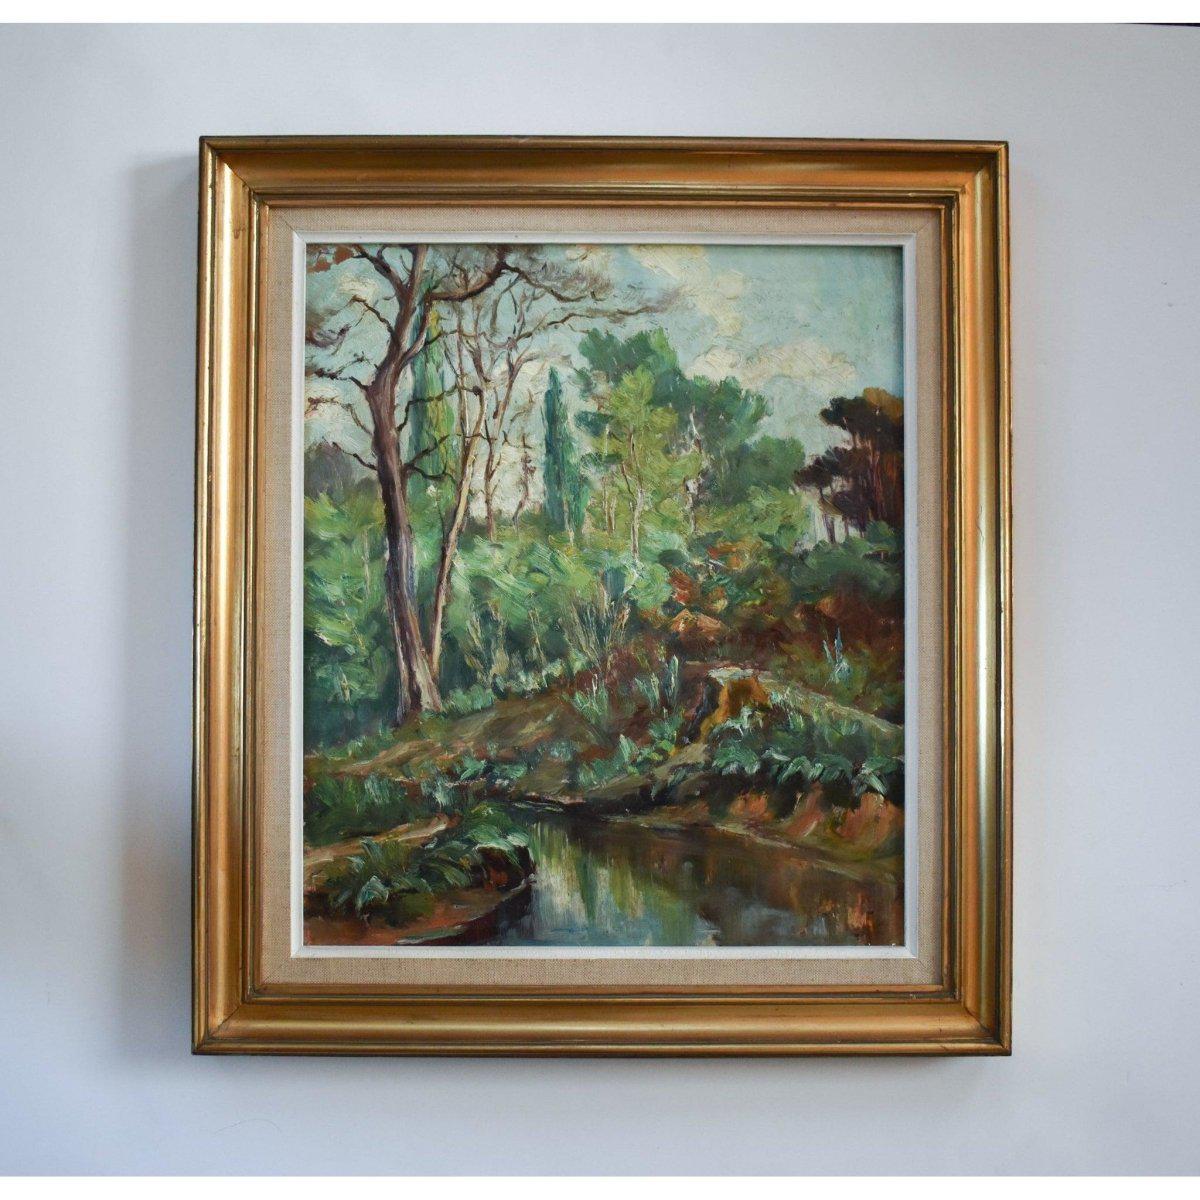 Vintage landscape oil painting forest stream French expressionist art circa 1950 for sale at Winckelmann Gallery